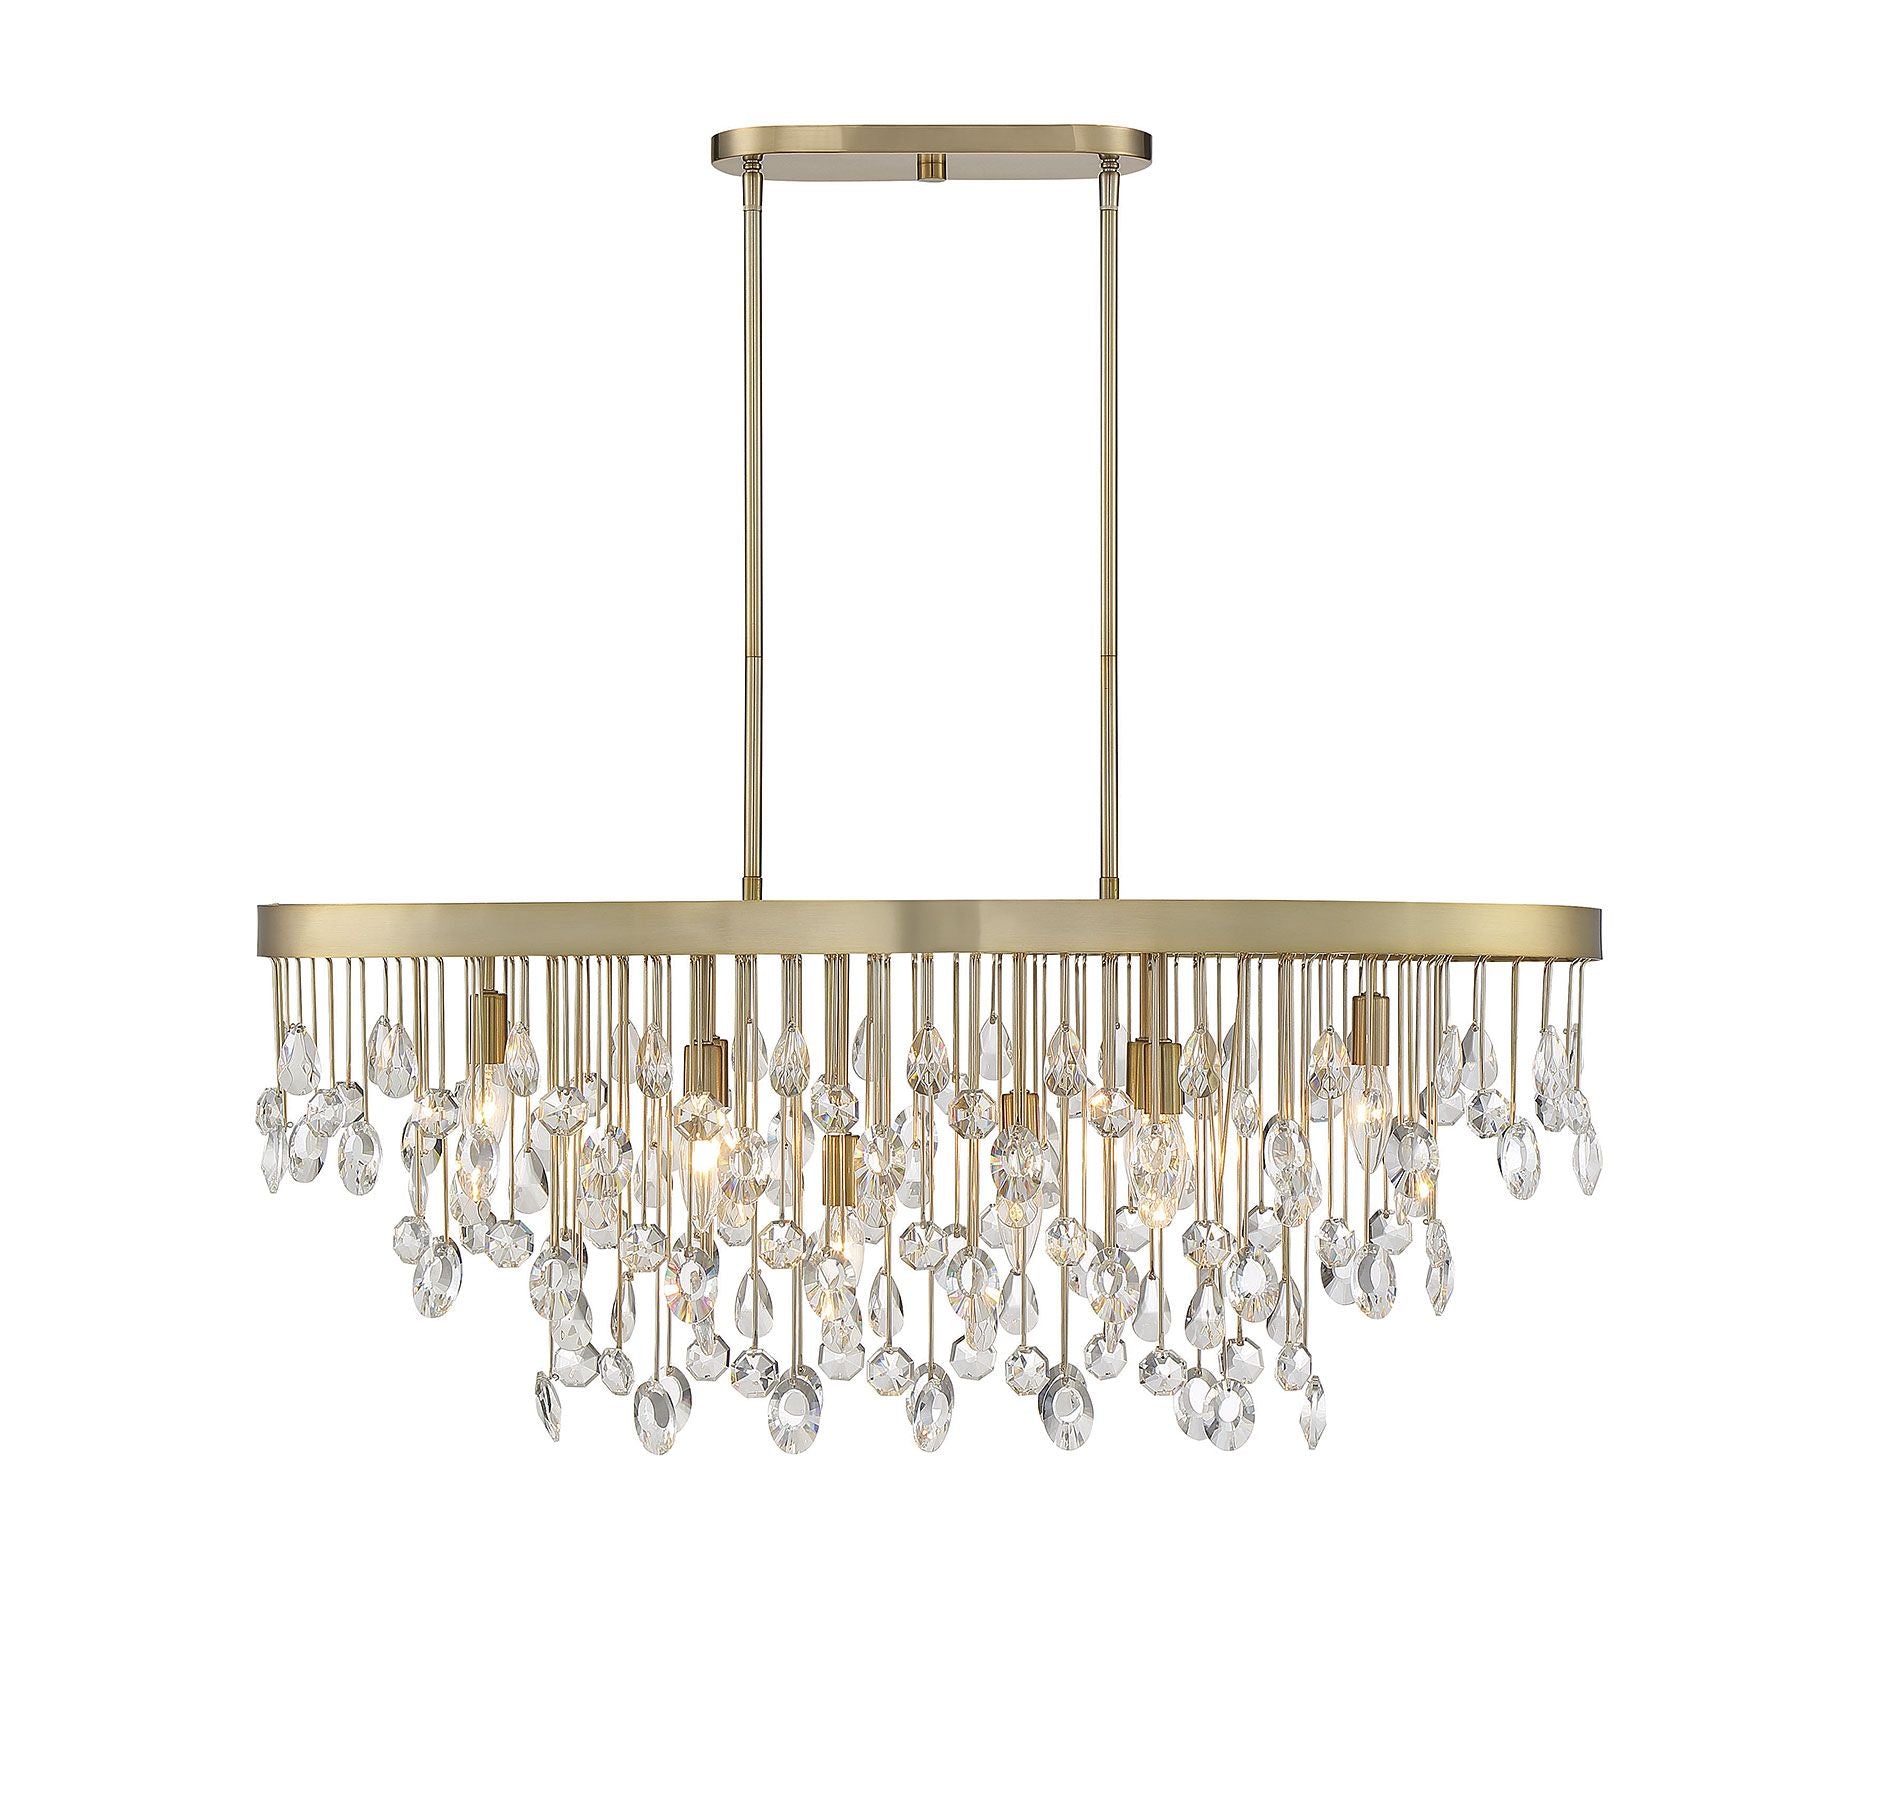 Savoy House Livorno 8-Light Linear Chandelier in Noble Brass 1-1847-8-127